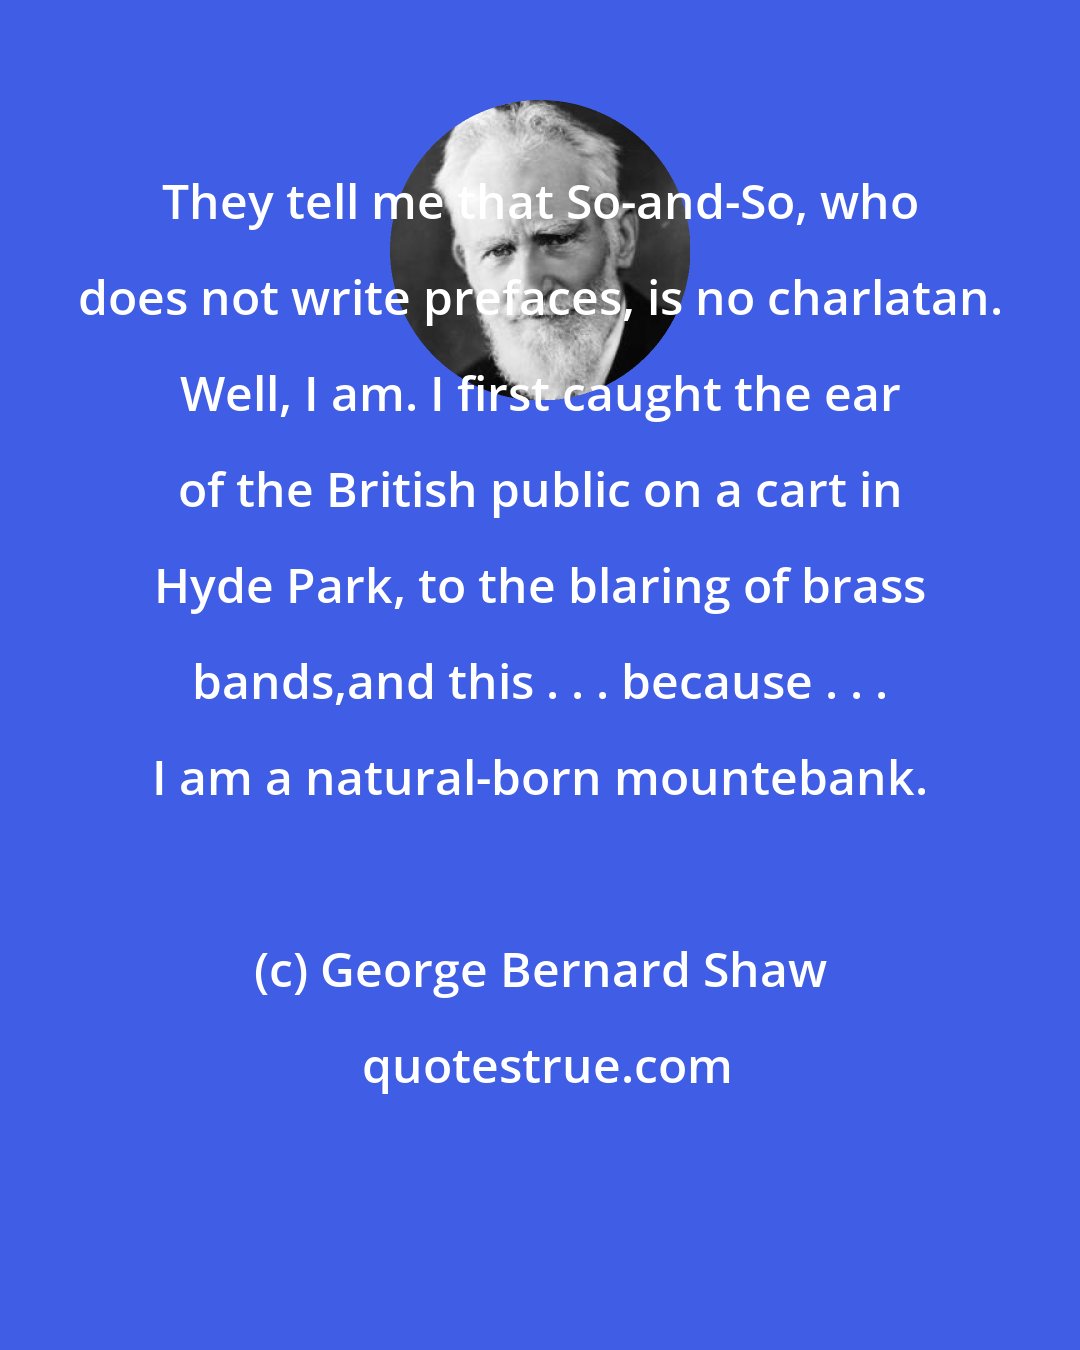 George Bernard Shaw: They tell me that So-and-So, who does not write prefaces, is no charlatan. Well, I am. I first caught the ear of the British public on a cart in Hyde Park, to the blaring of brass bands,and this . . . because . . . I am a natural-born mountebank.